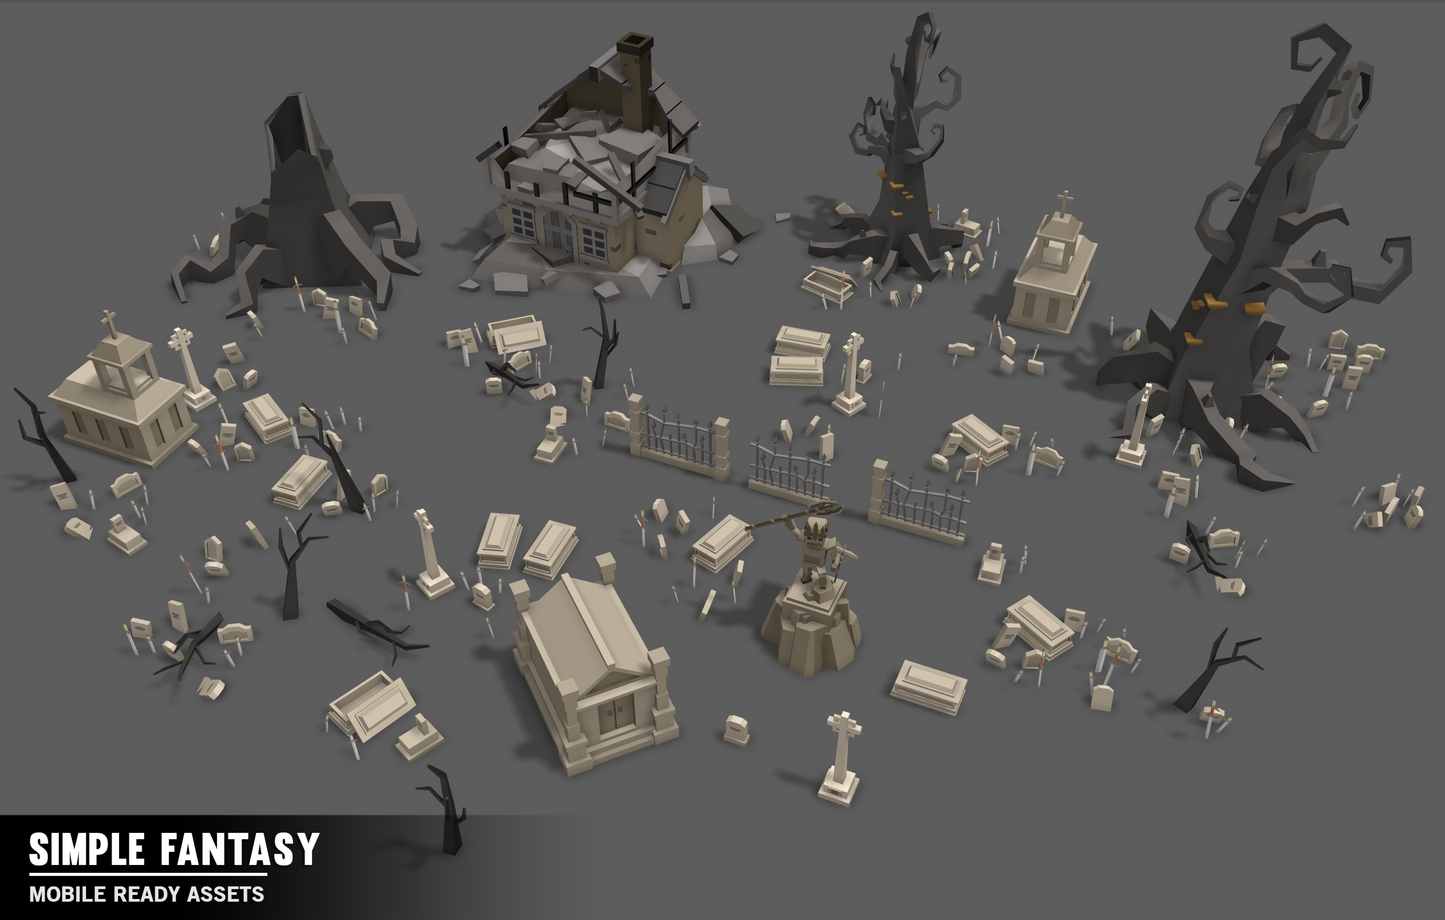 Simple Fantasy low poly haunted house, graveyard and tree assets for game developers